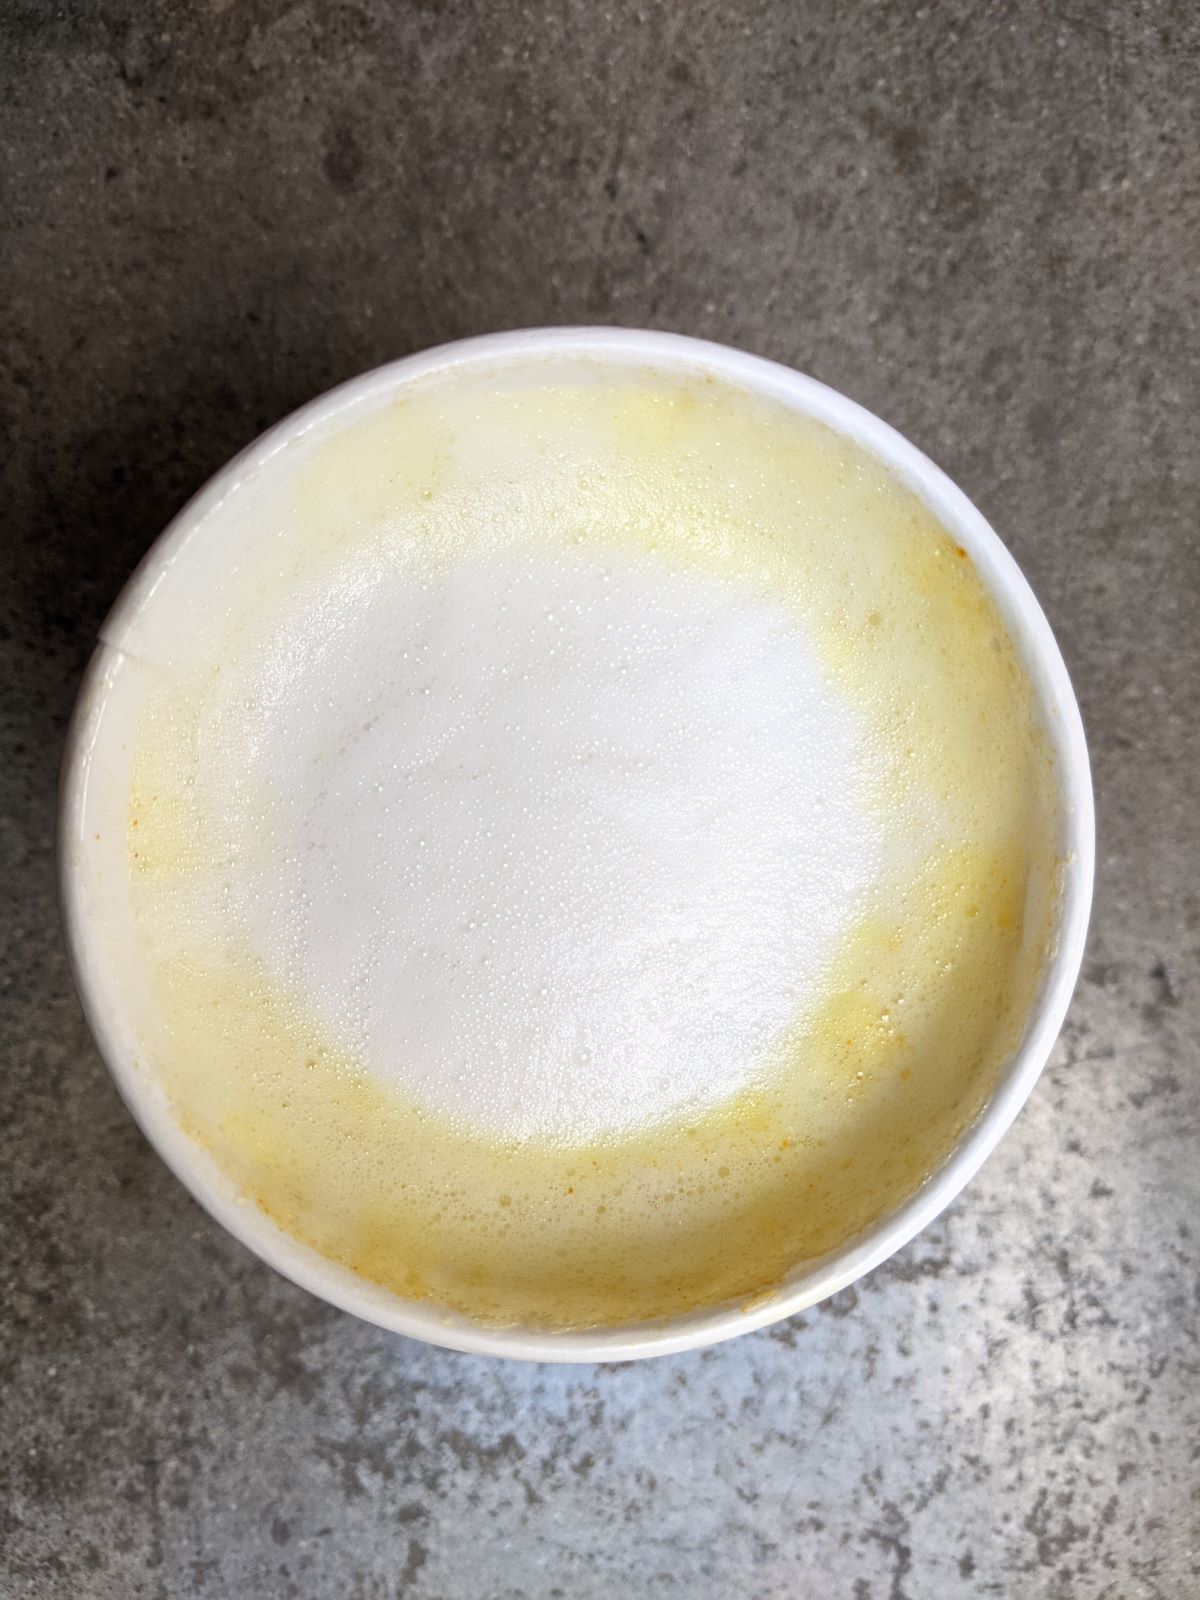 Golden Milk Latte from Common Ground Food Co-op. A top view of a cup of white frothy latte with yellow edges. The cup sits on a grey concrete floor. Photo by Tias Paul.